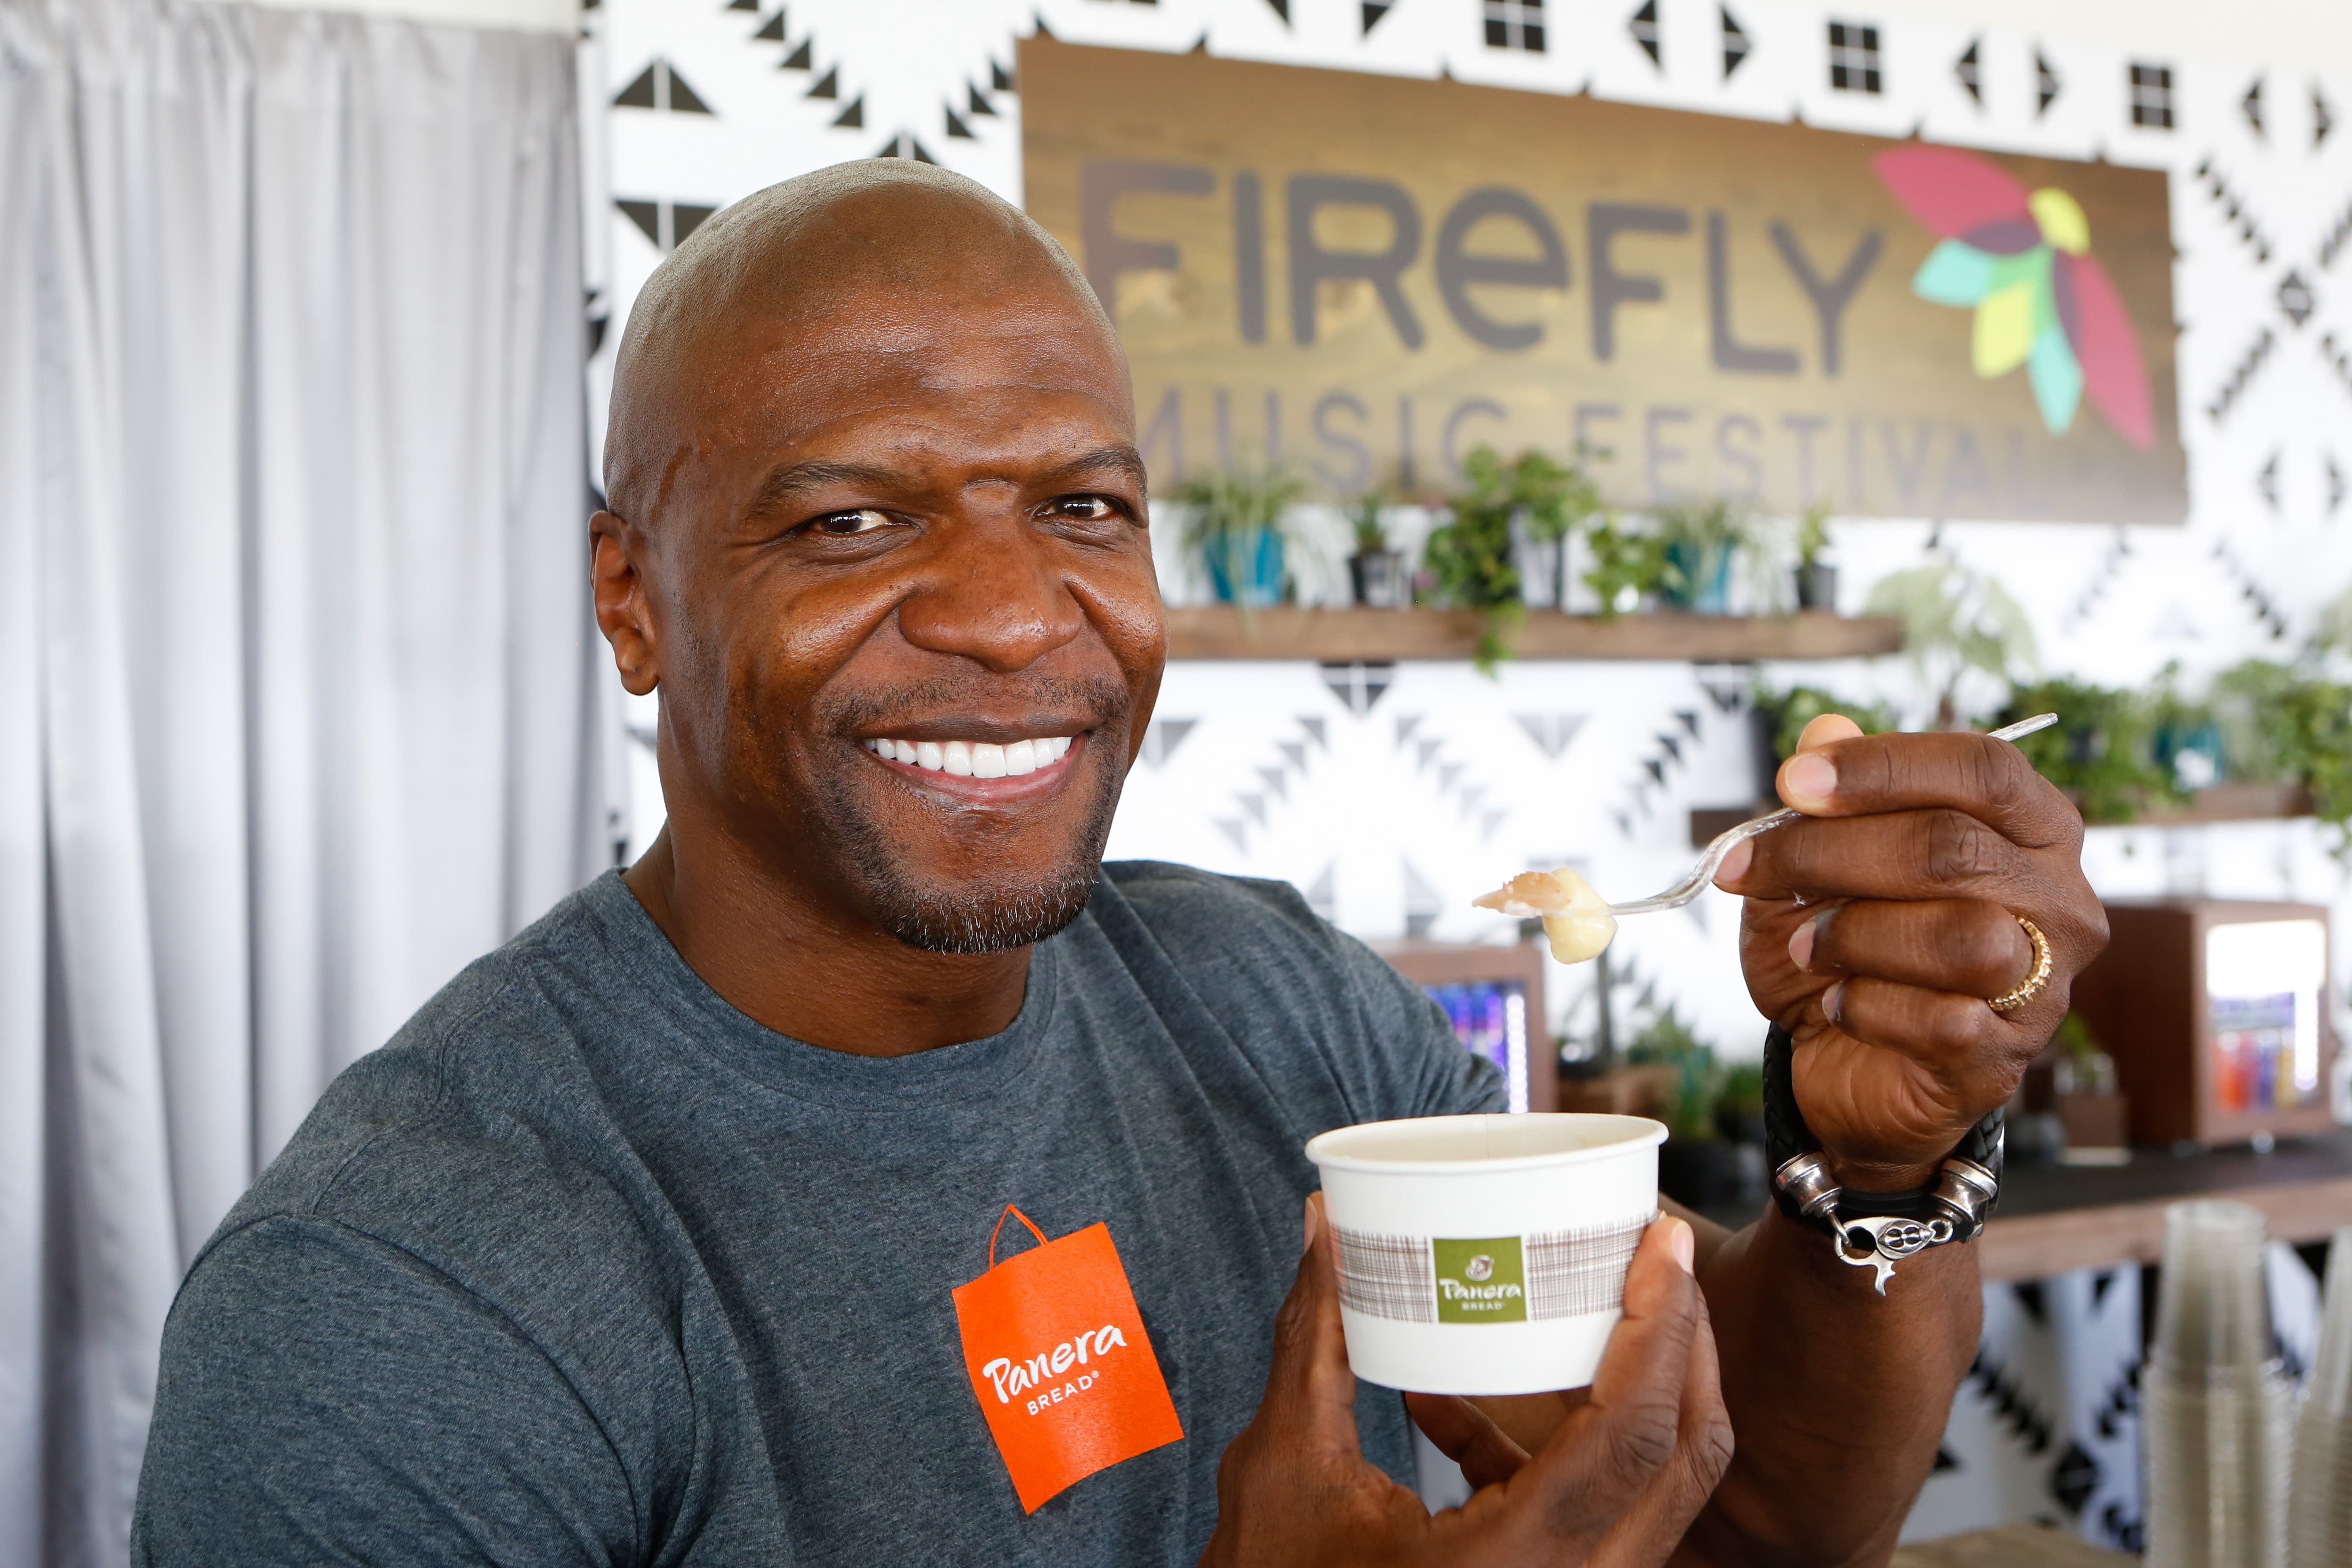 https://www.thehypemagazine.com/wp-content/uploads/2018/06/Panera-Delivery-with-Terry-Crews-at-Firefly-Music-Festival14-min.jpg